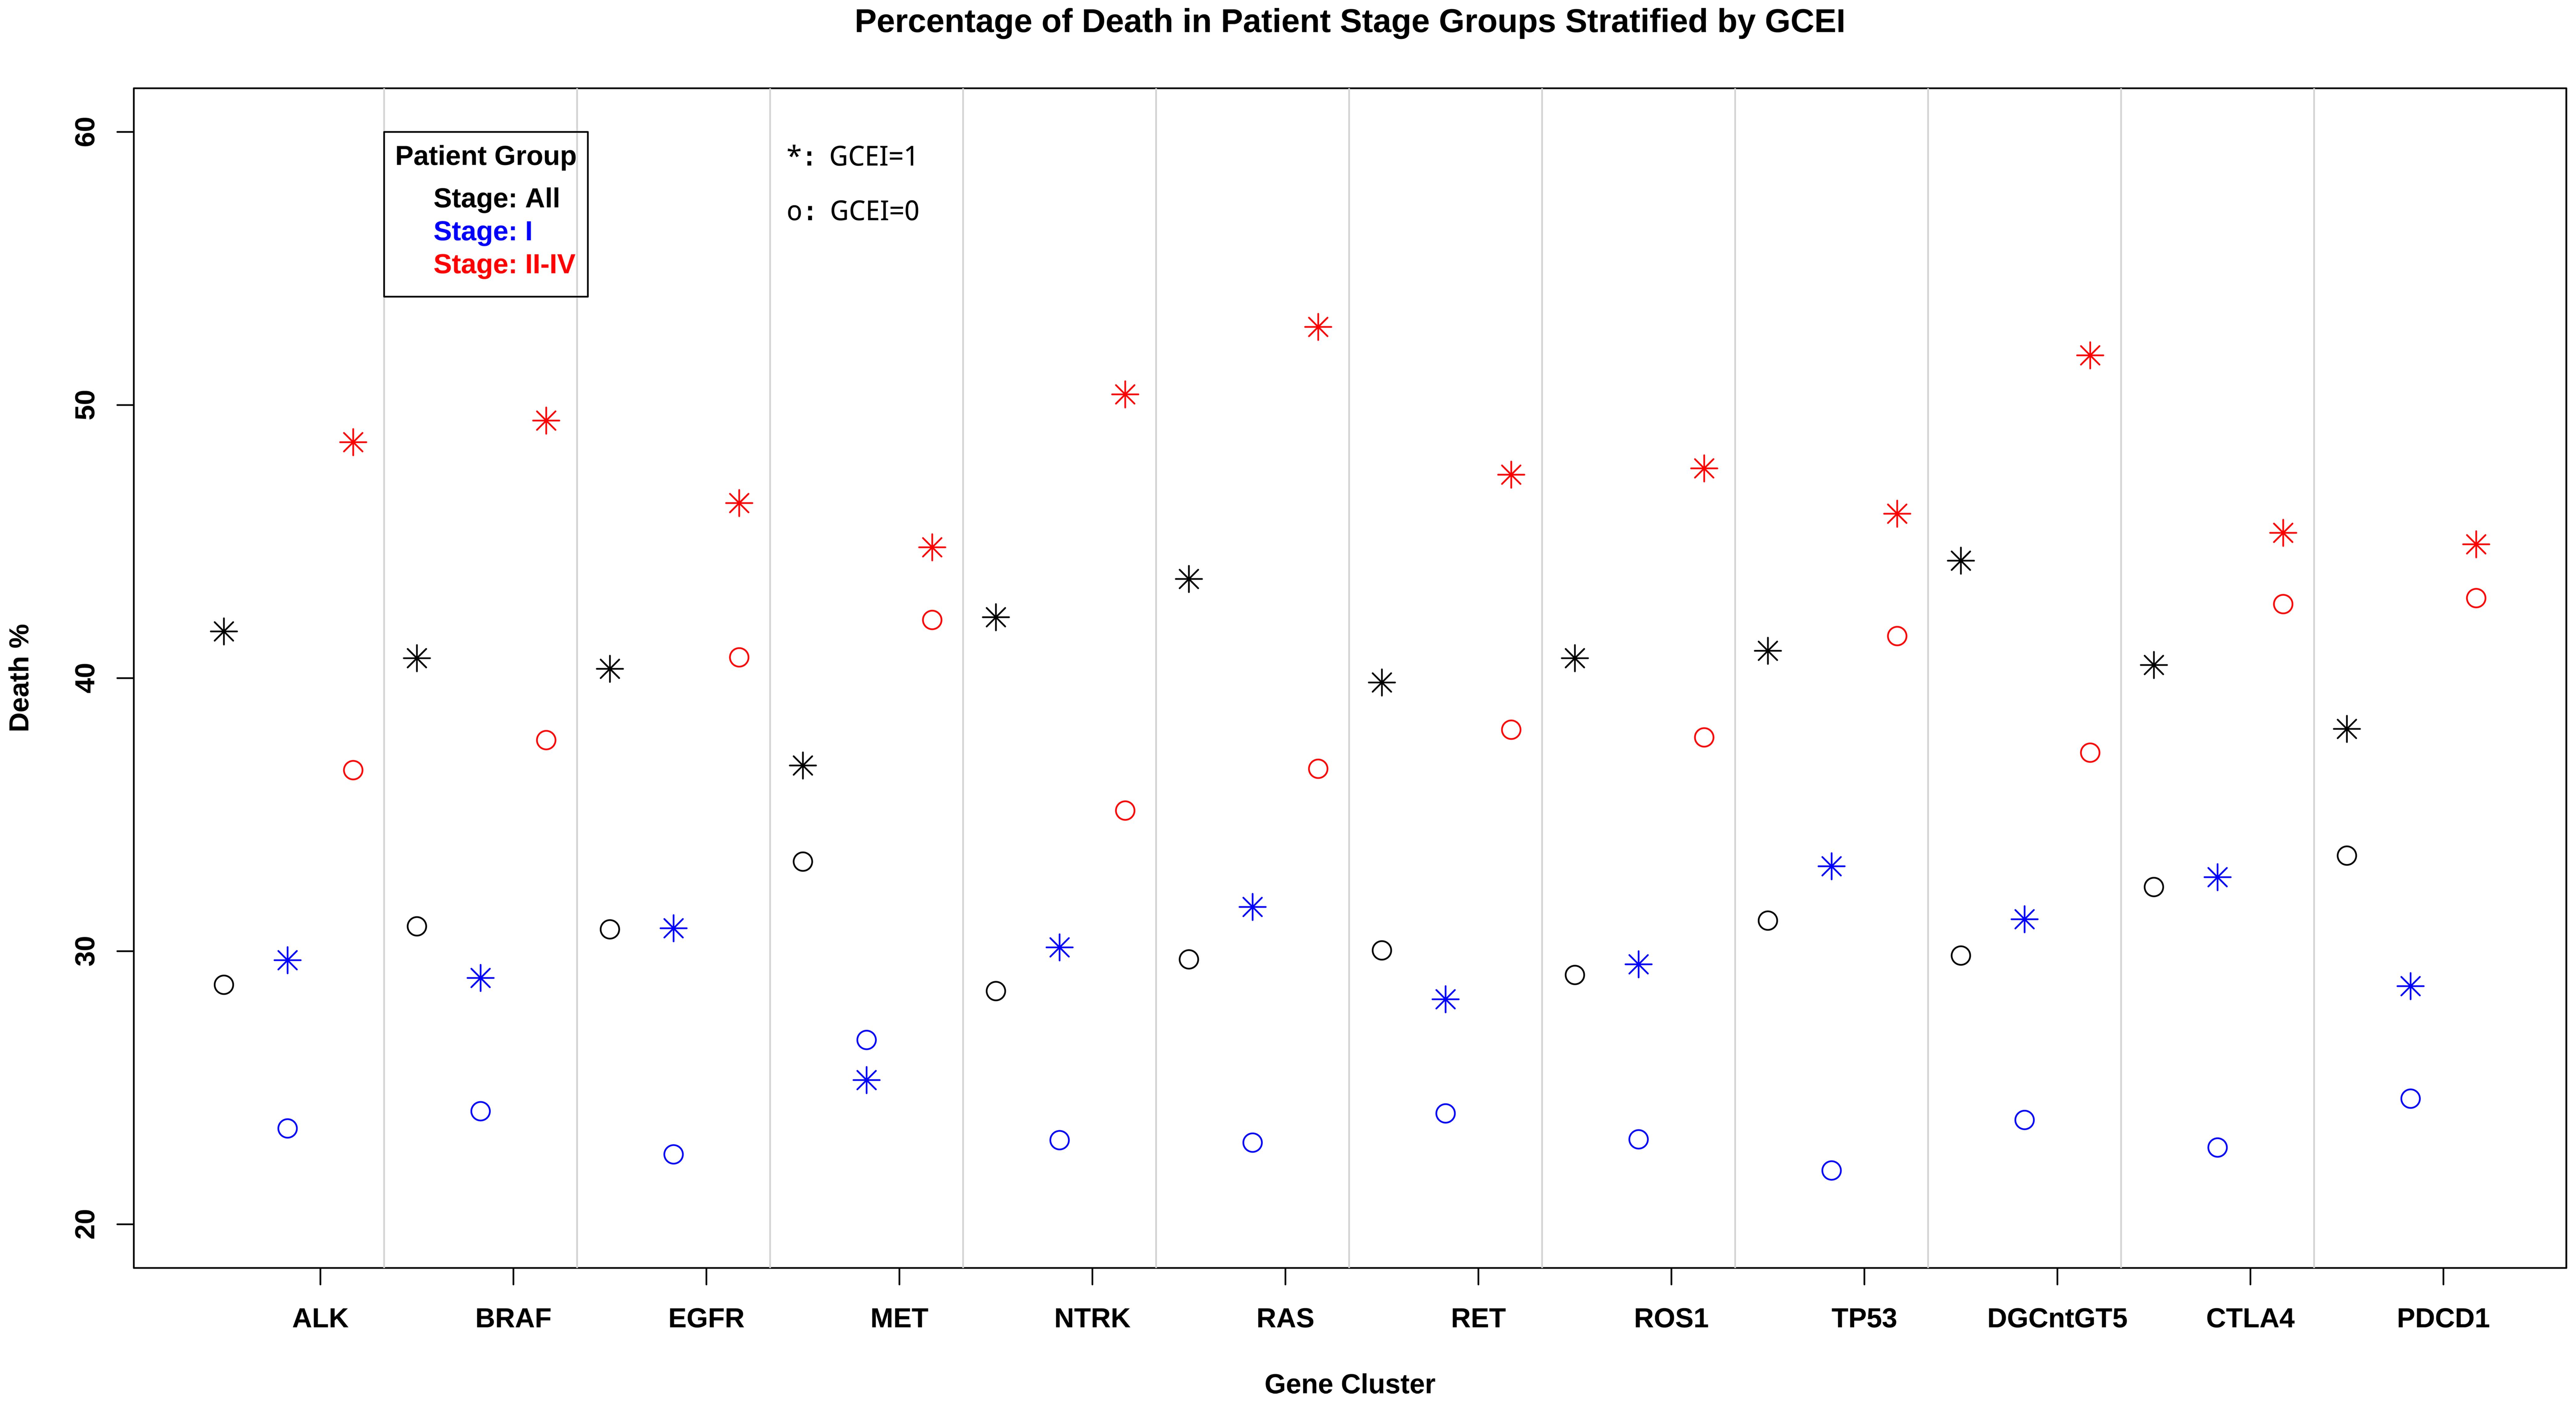 Percentage of deaths of the lung cancer subgroups (GCEI = 0, 1) within different stages or all stages.